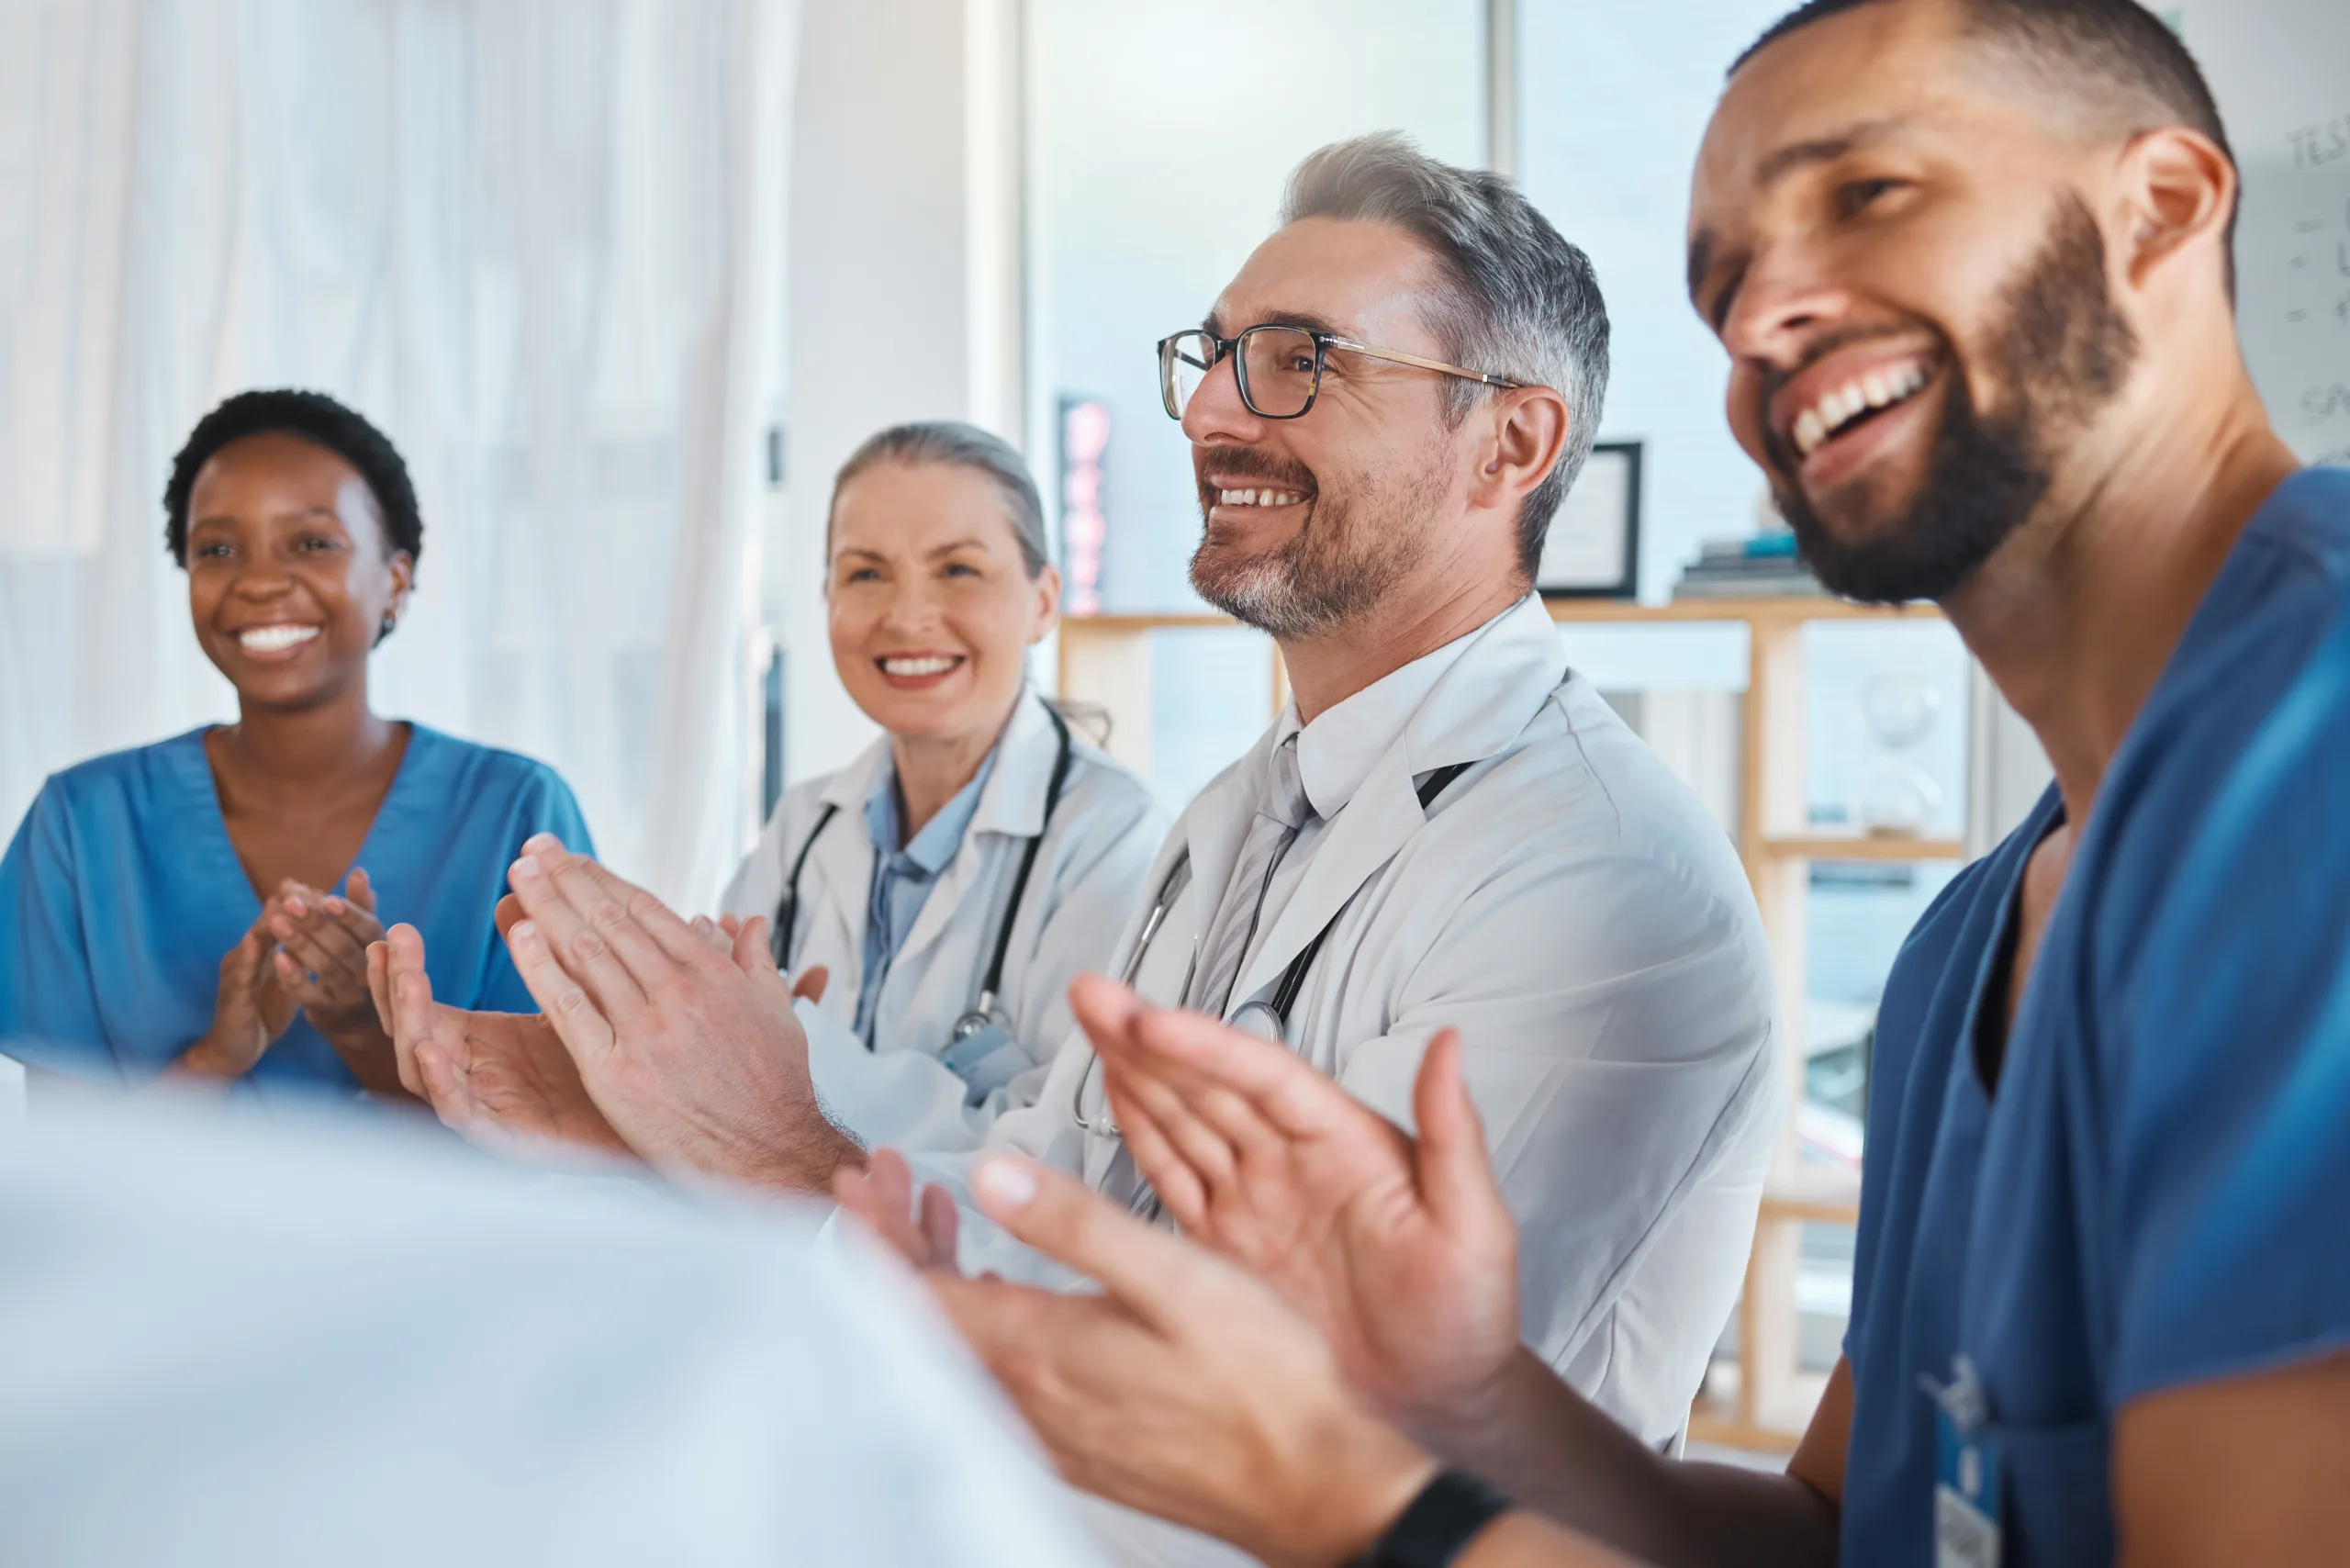 Doctors, nurses and teamwork collaboration clapping after medical presentation